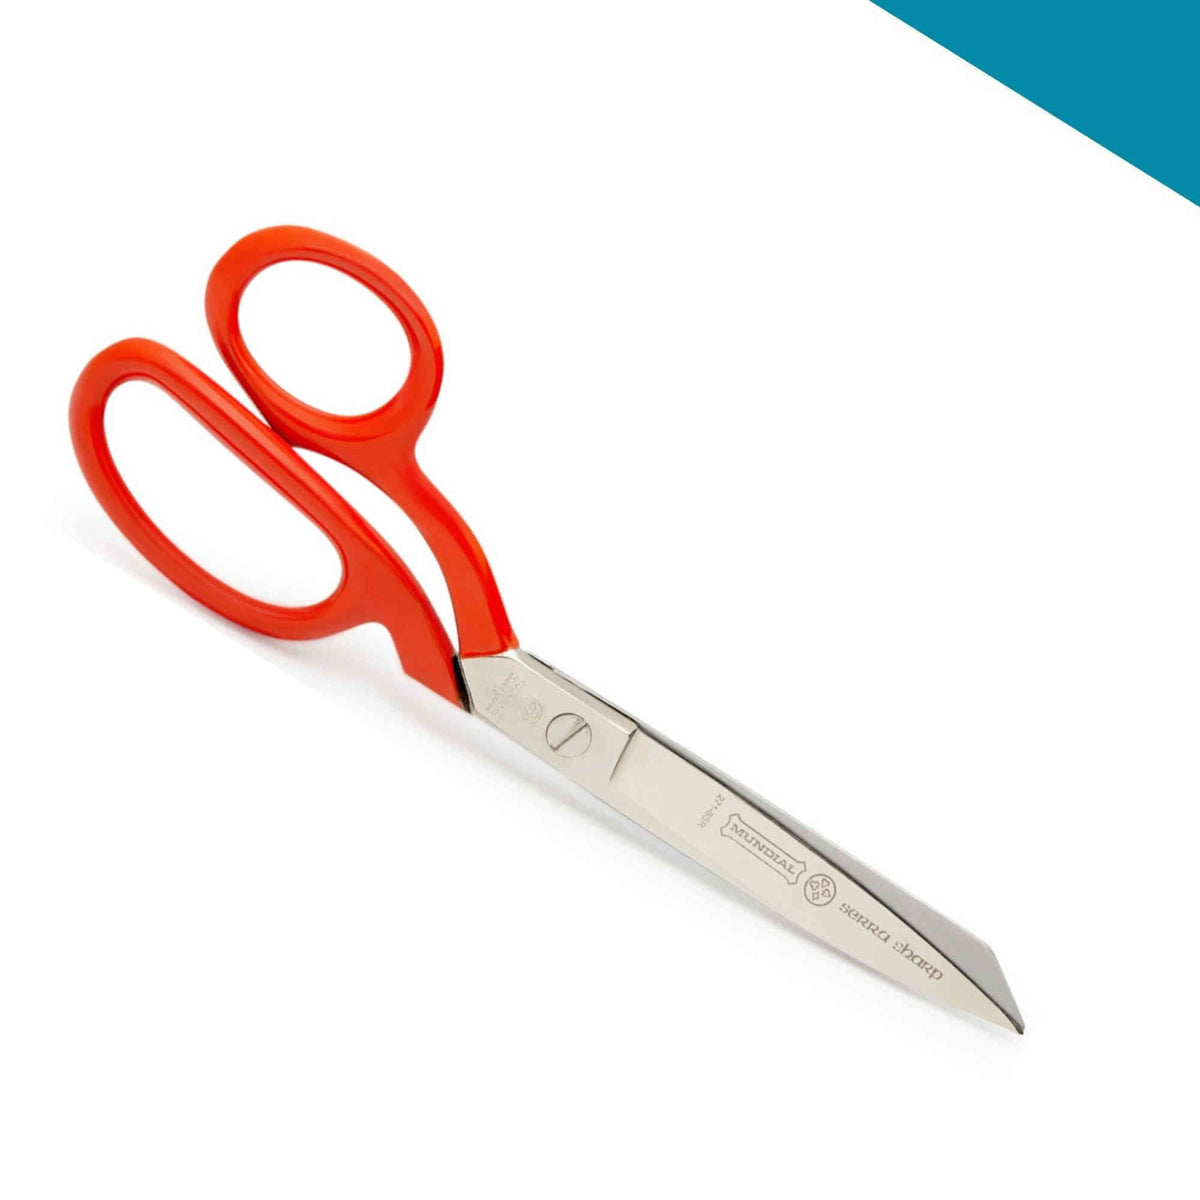 Kai 7250L 10-inch Left-Handed Professional Shears